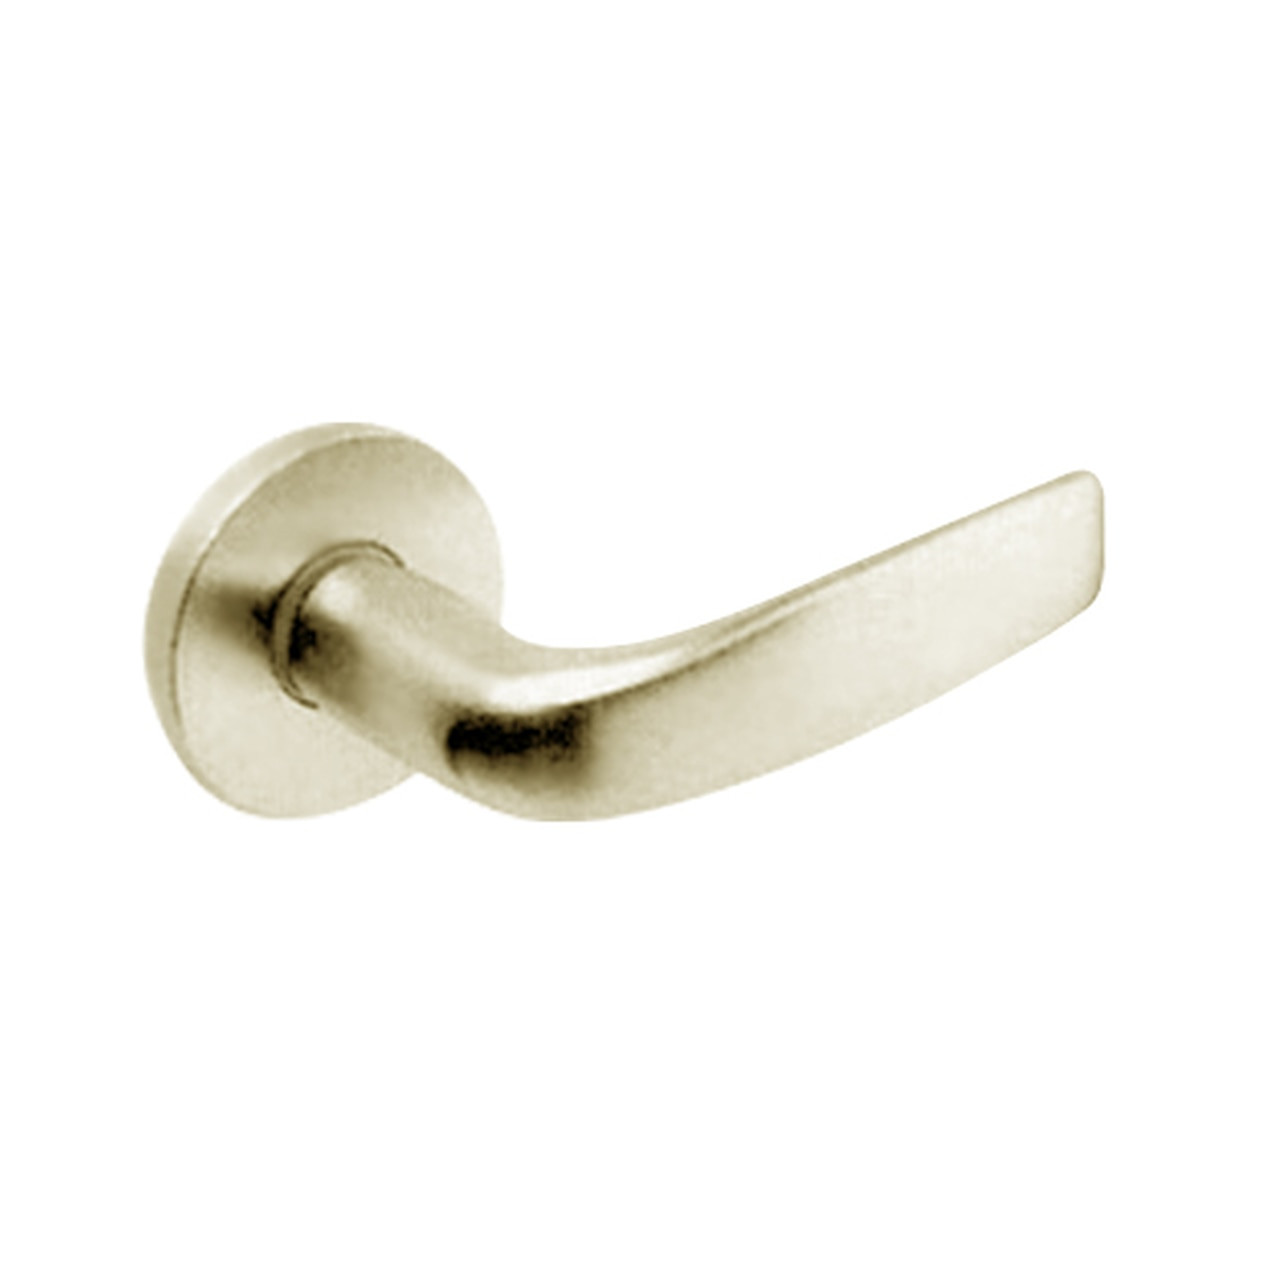 ML2060-CSF-606 Corbin Russwin ML2000 Series Mortise Privacy Locksets with Citation Lever in Satin Brass